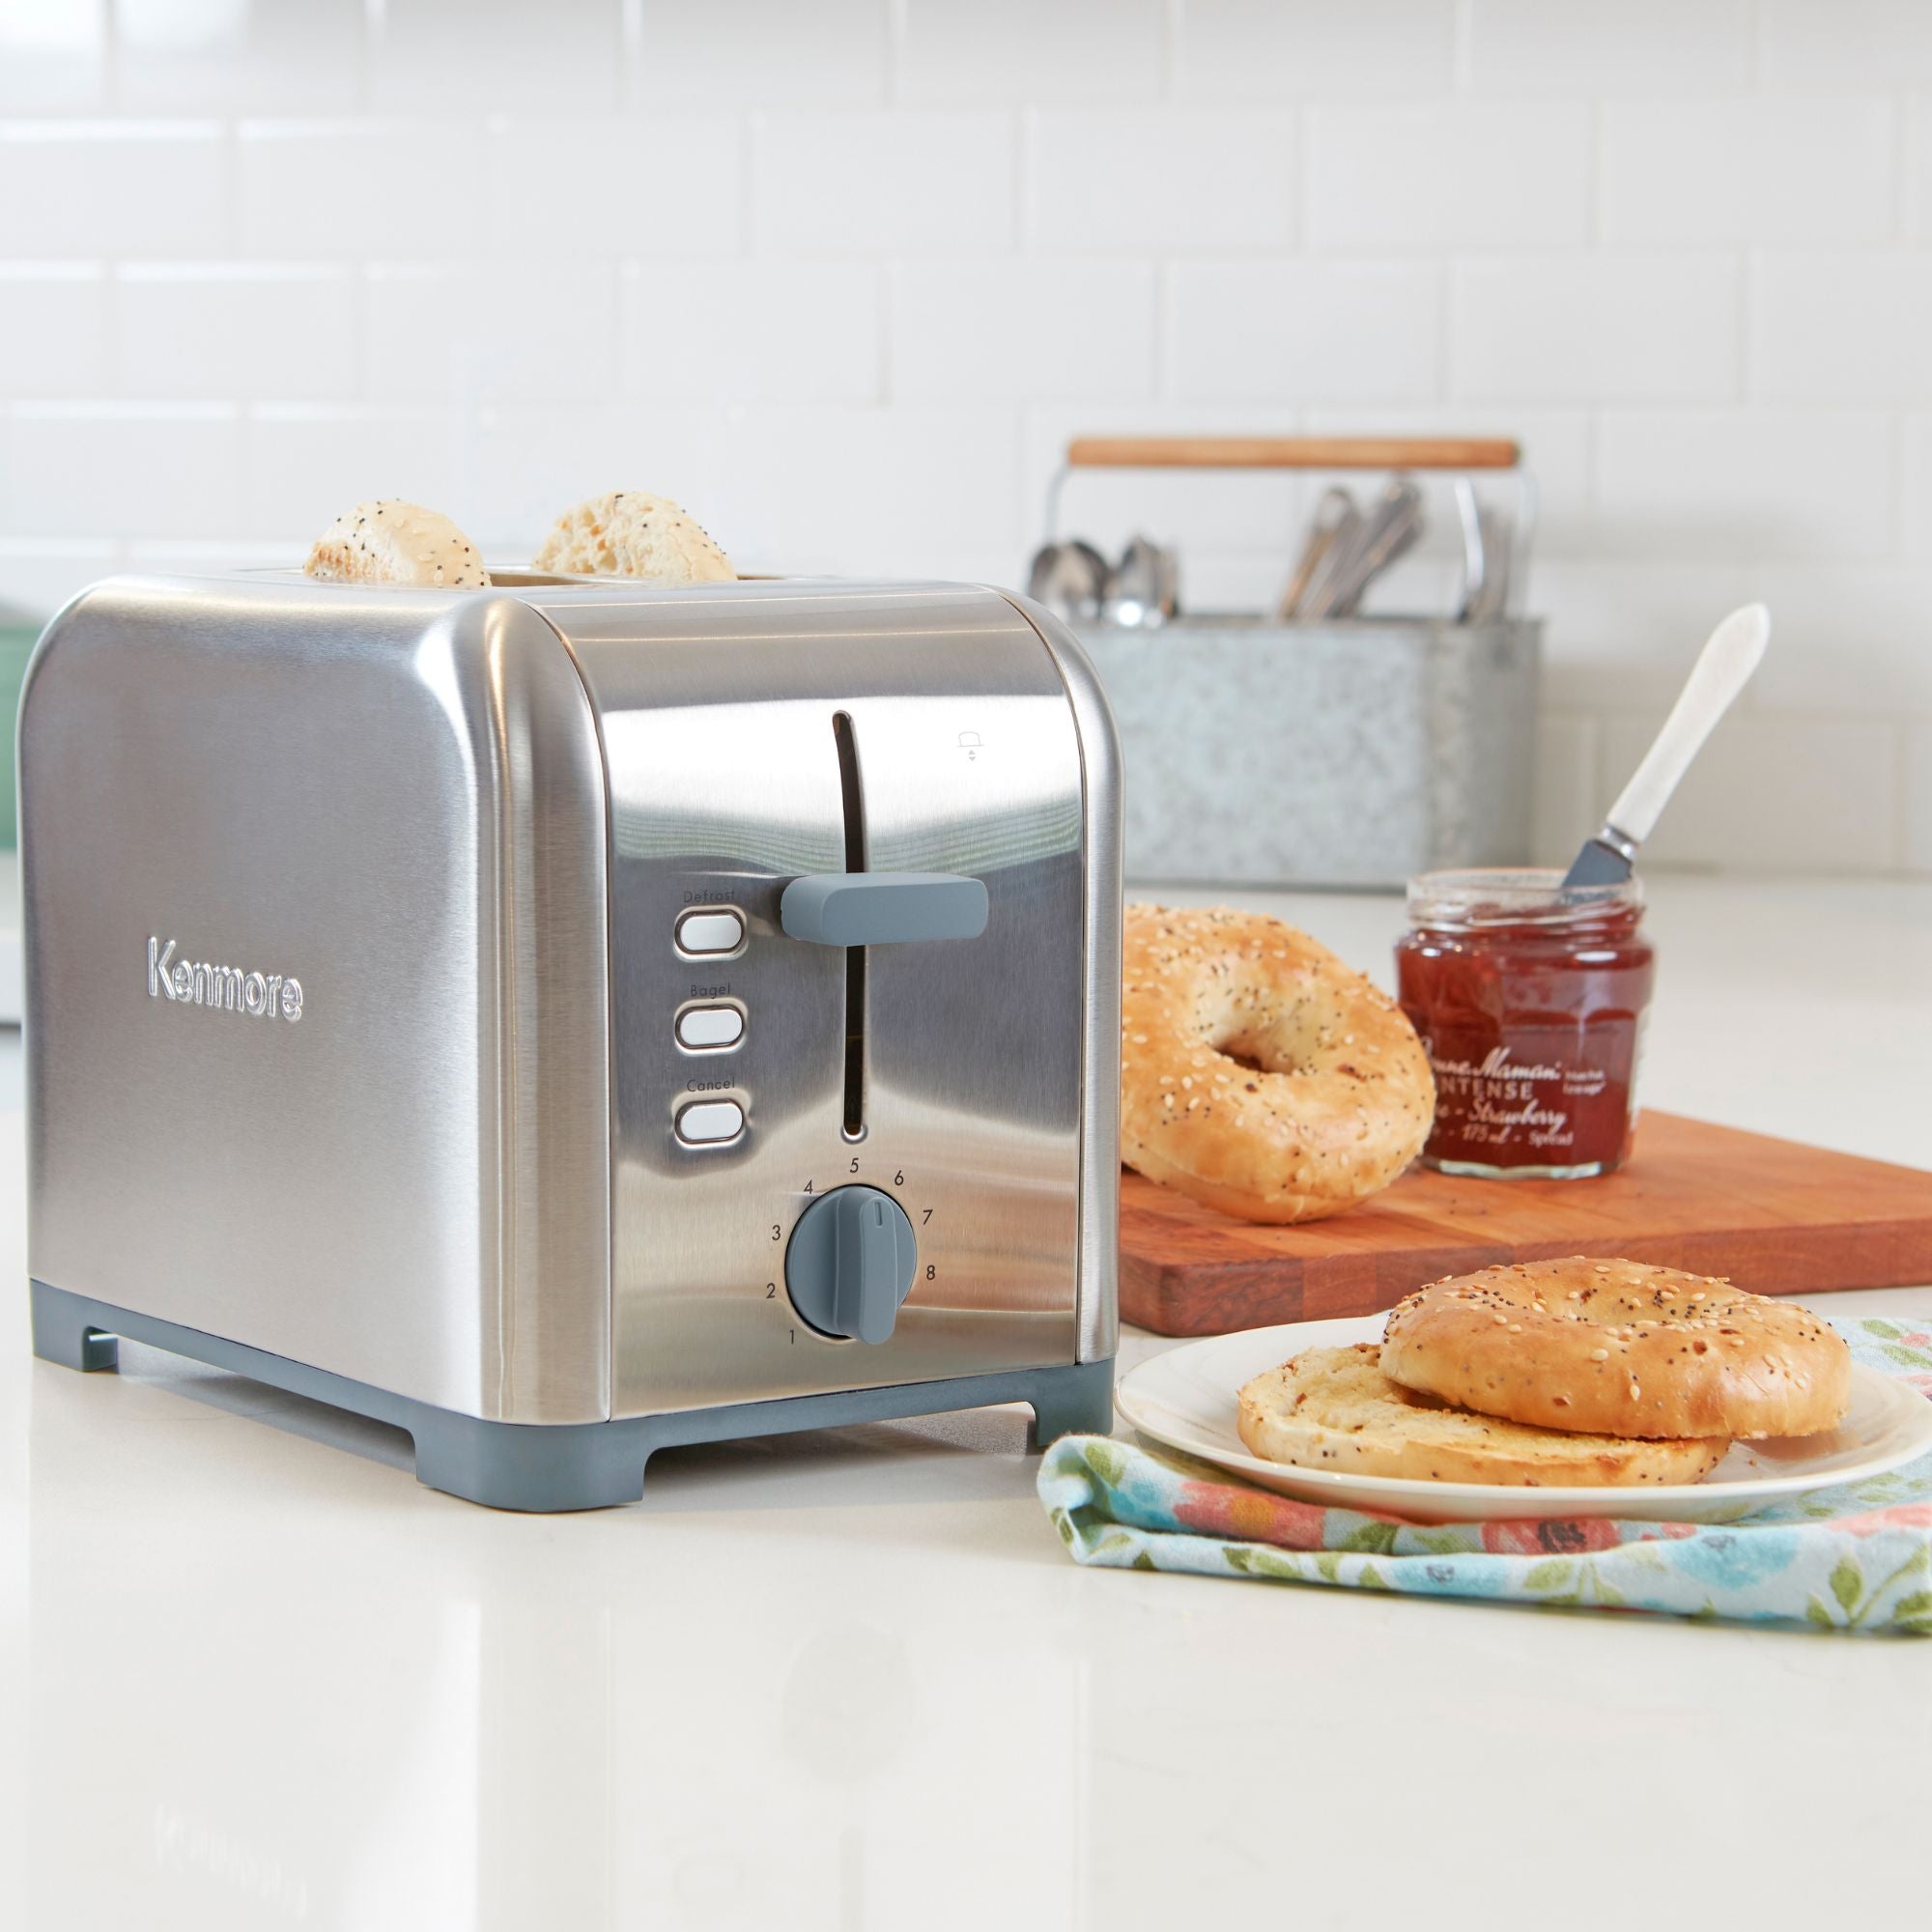 Kenmore 2-slice stainless steel toaster with toasted bagel slices inside on a light gray countertop with white tile backsplash behind. To the right of the toaster is a napkin and plate with toasted bagel and a wooden cutting board with uncut bagels and an open jam jar